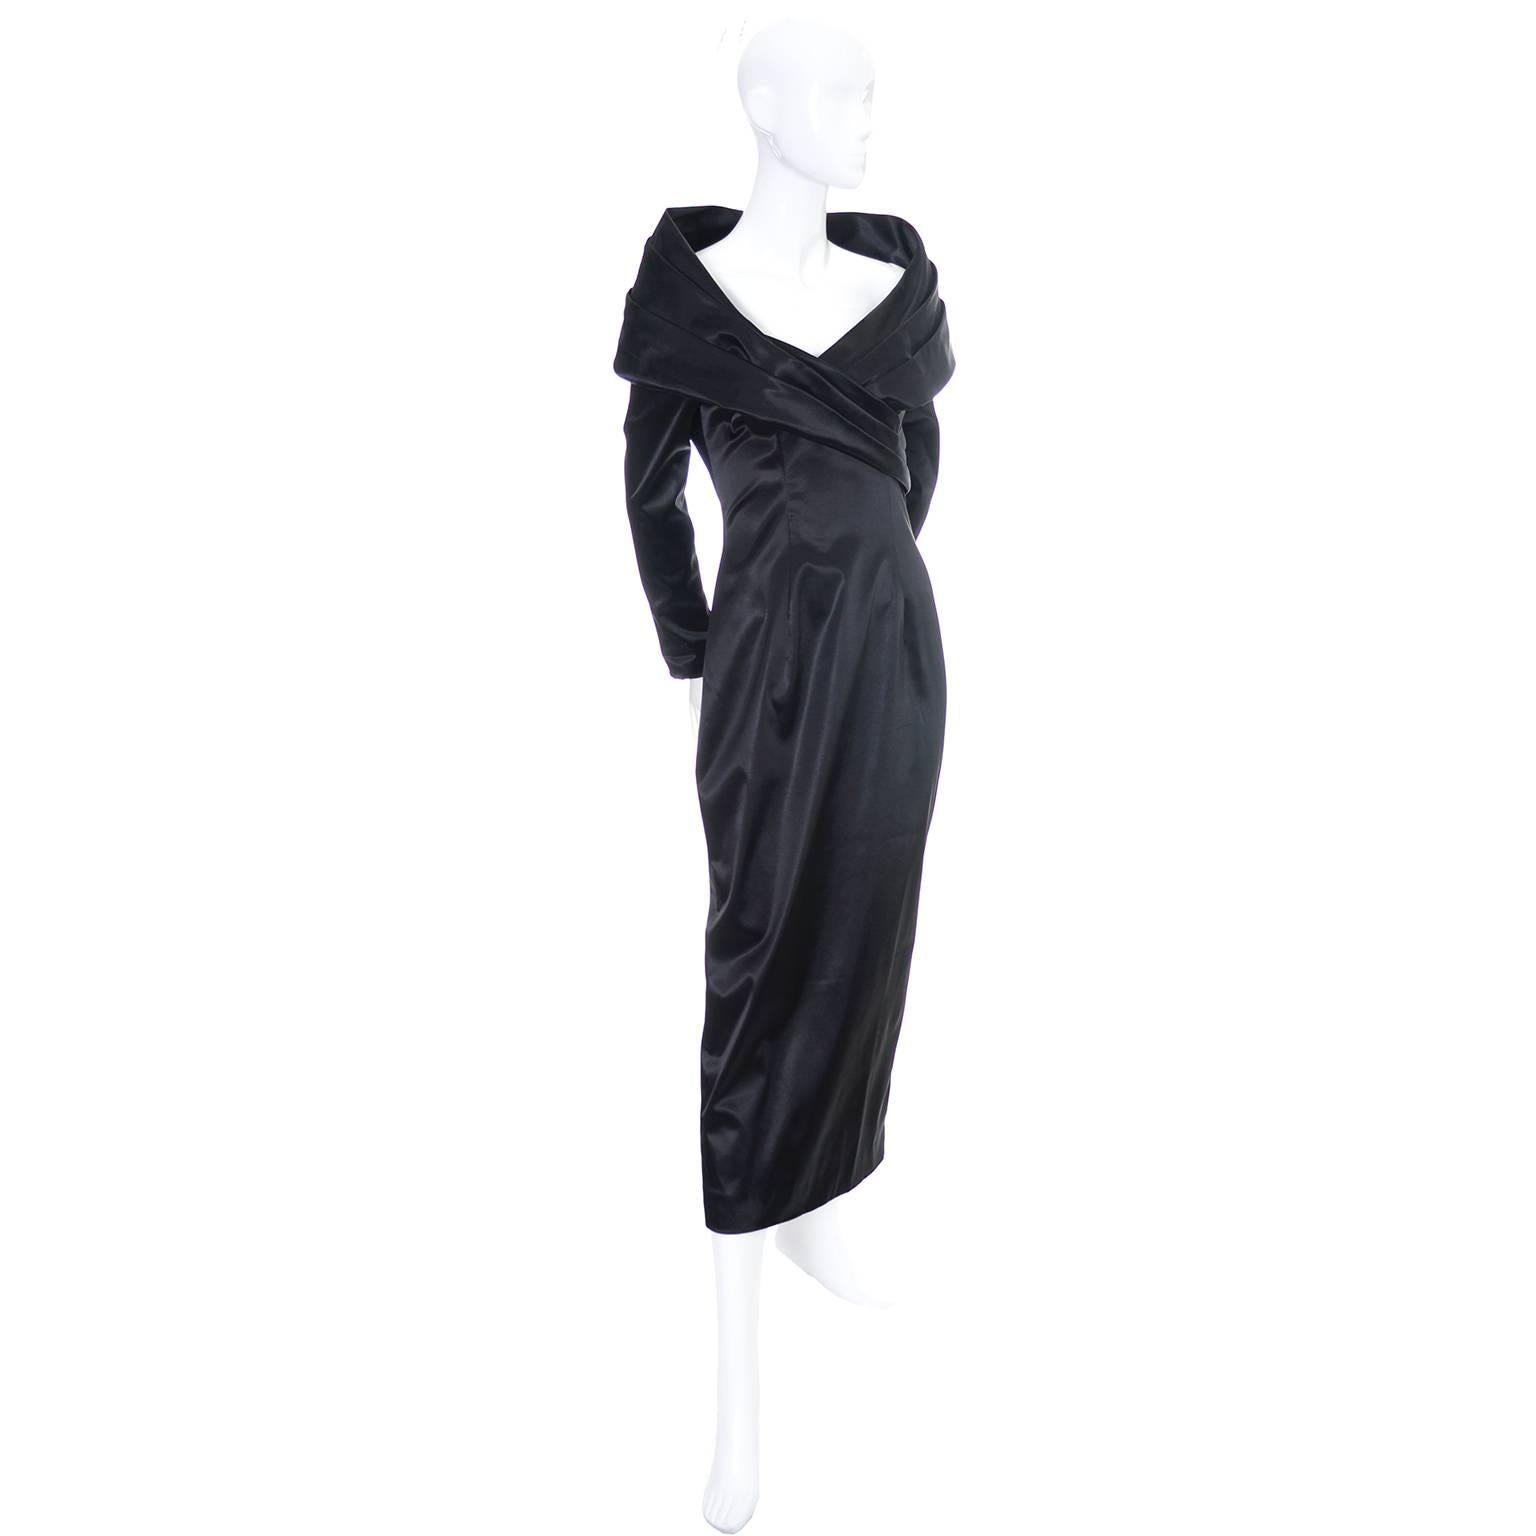 This incredible Sophie Sitbon black dress has a dramatic shawl collar that sits just on the edge of the shoulders to reveal the décolletage. The dress was made in France in the 1990's and is made of 65% Acetate, 29% Polyamide Nylon, and 6%